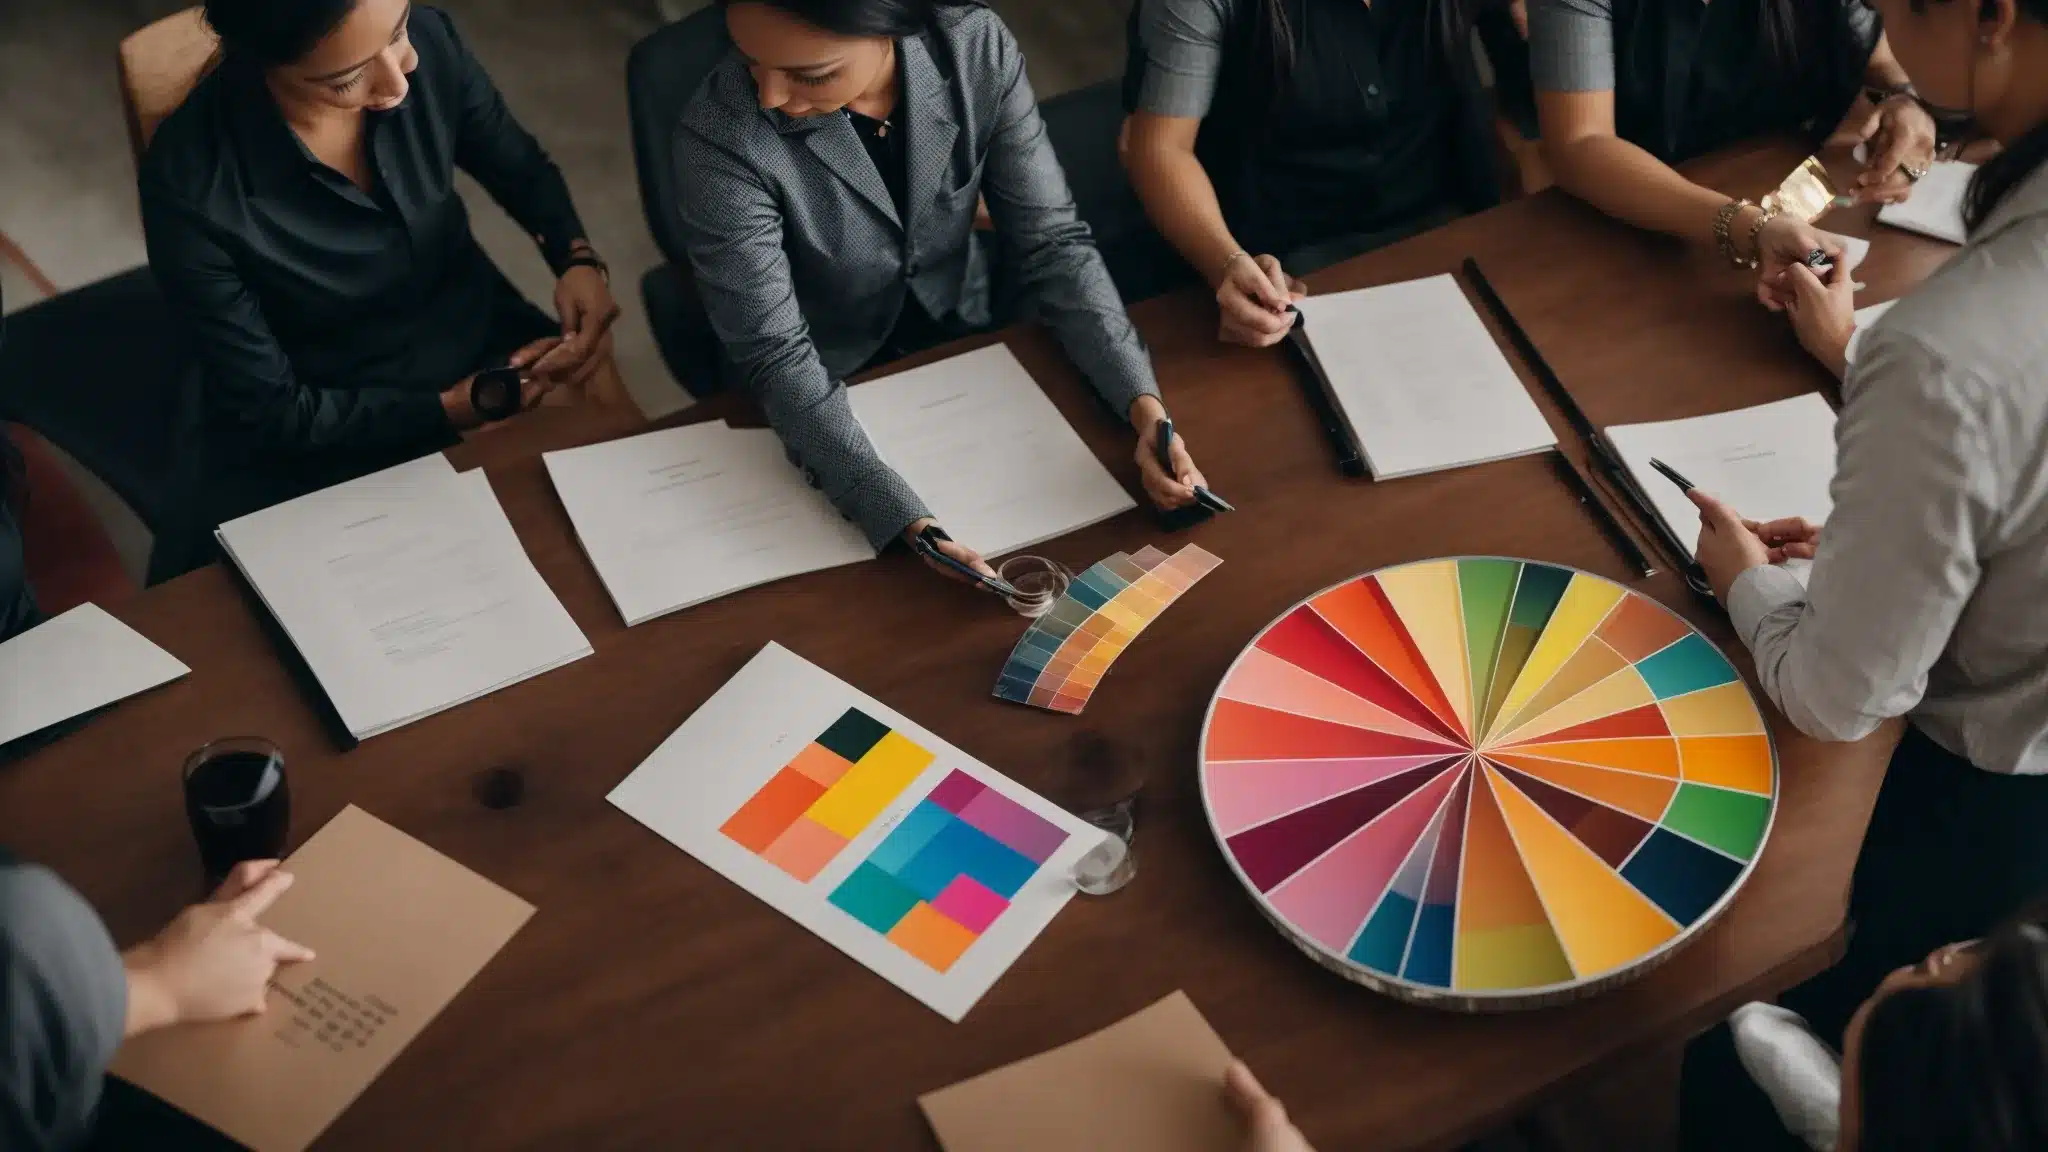 A Marketer Presents A Colorful Pie Chart To A Team During A Creative Branding Meeting.